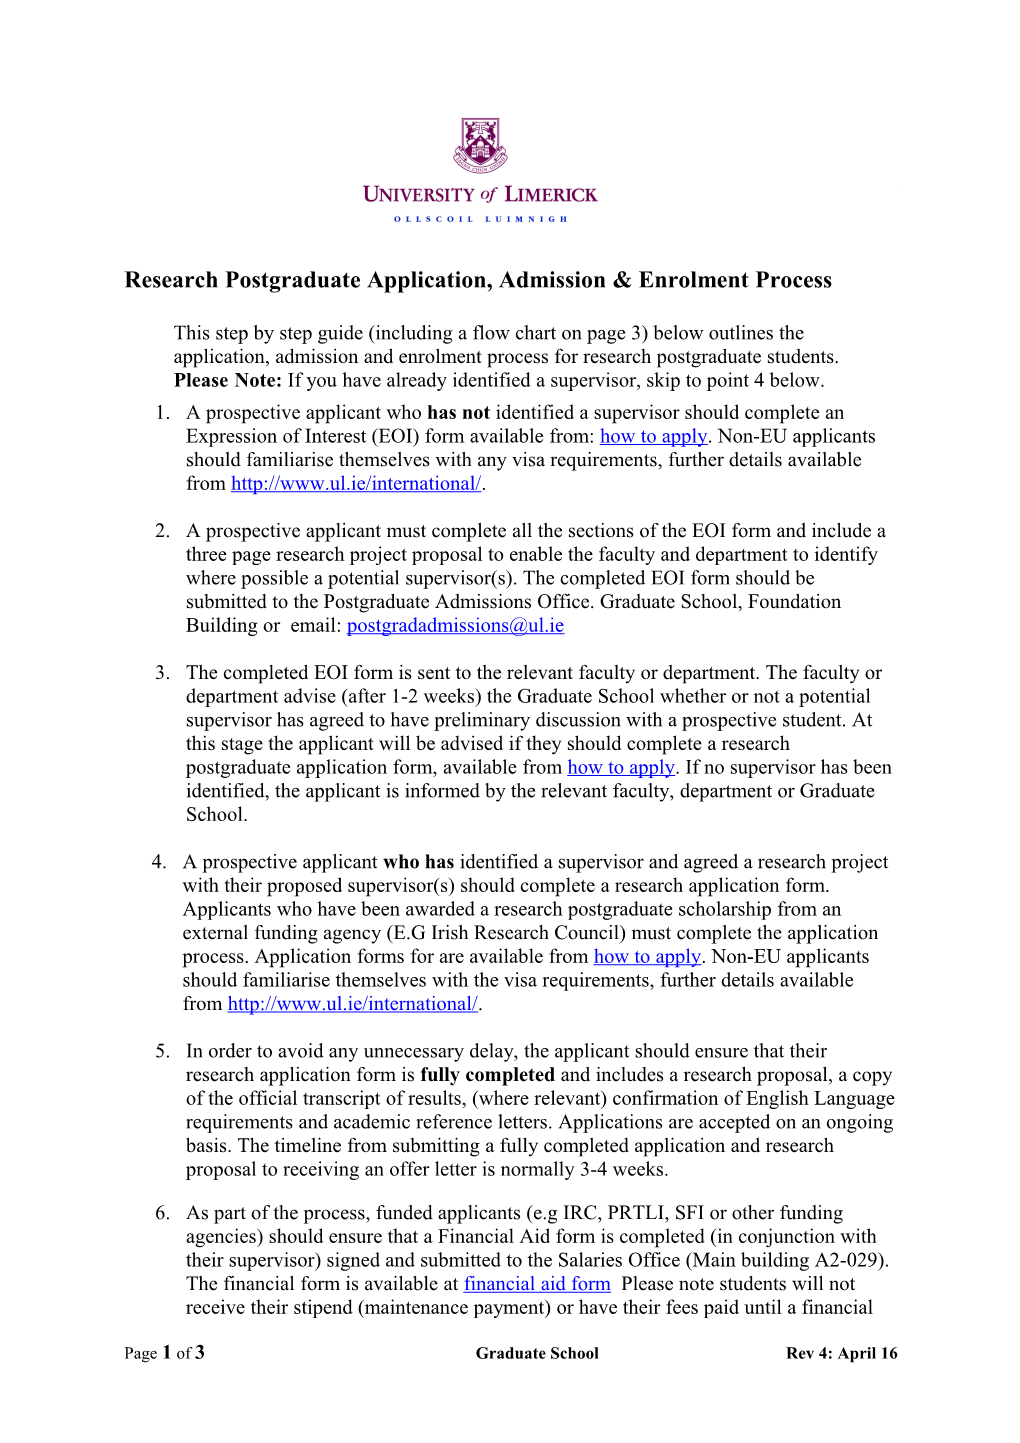 Research Postgraduate Application and Admissions Procedures